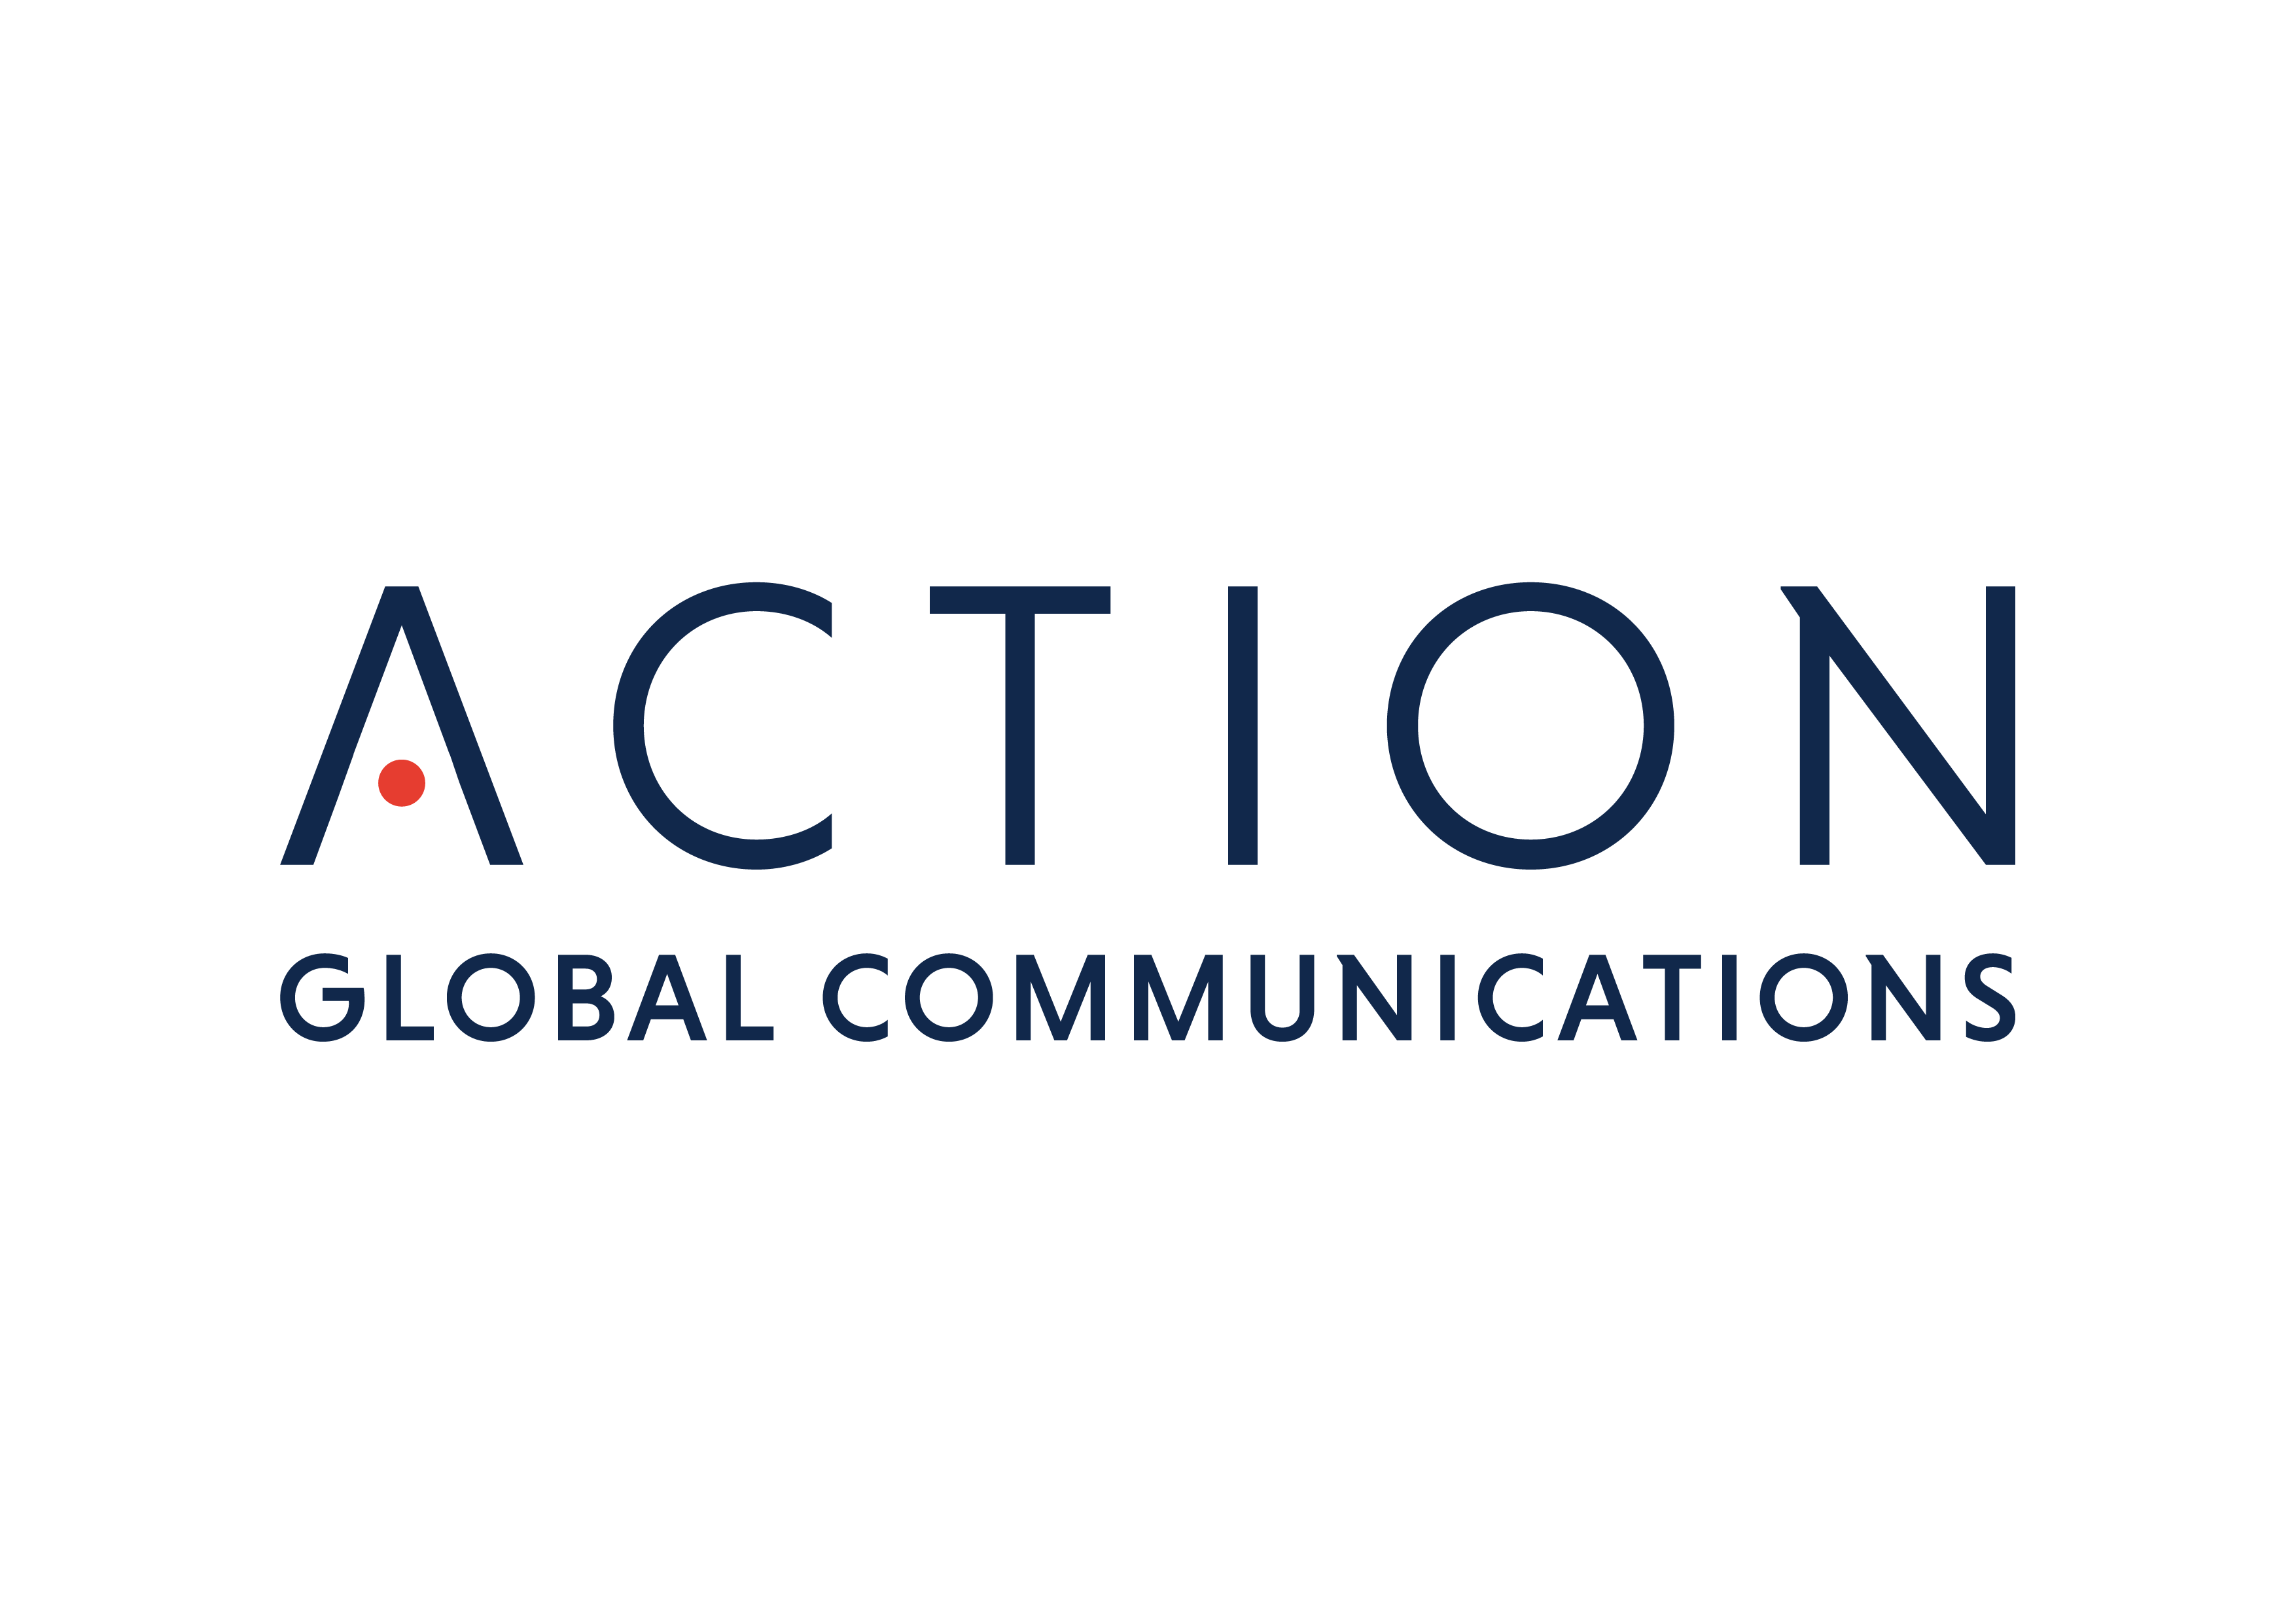 ACTION GLOBAL COMMUNICATIONS